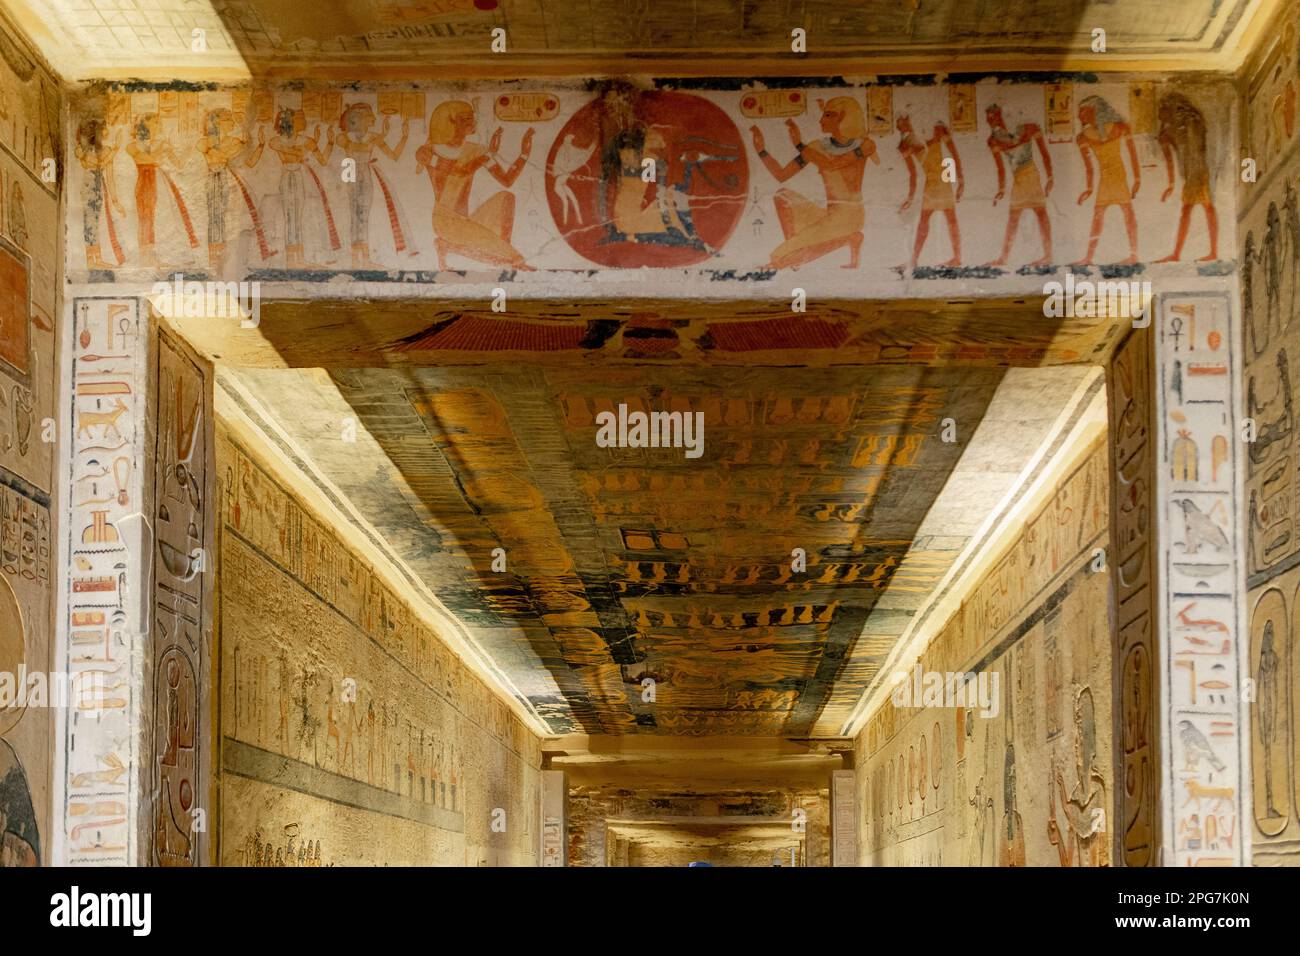 Inside Tomb of Ramesses IX, Valley of the Kings, near Luxor, Egypt Stock Photo